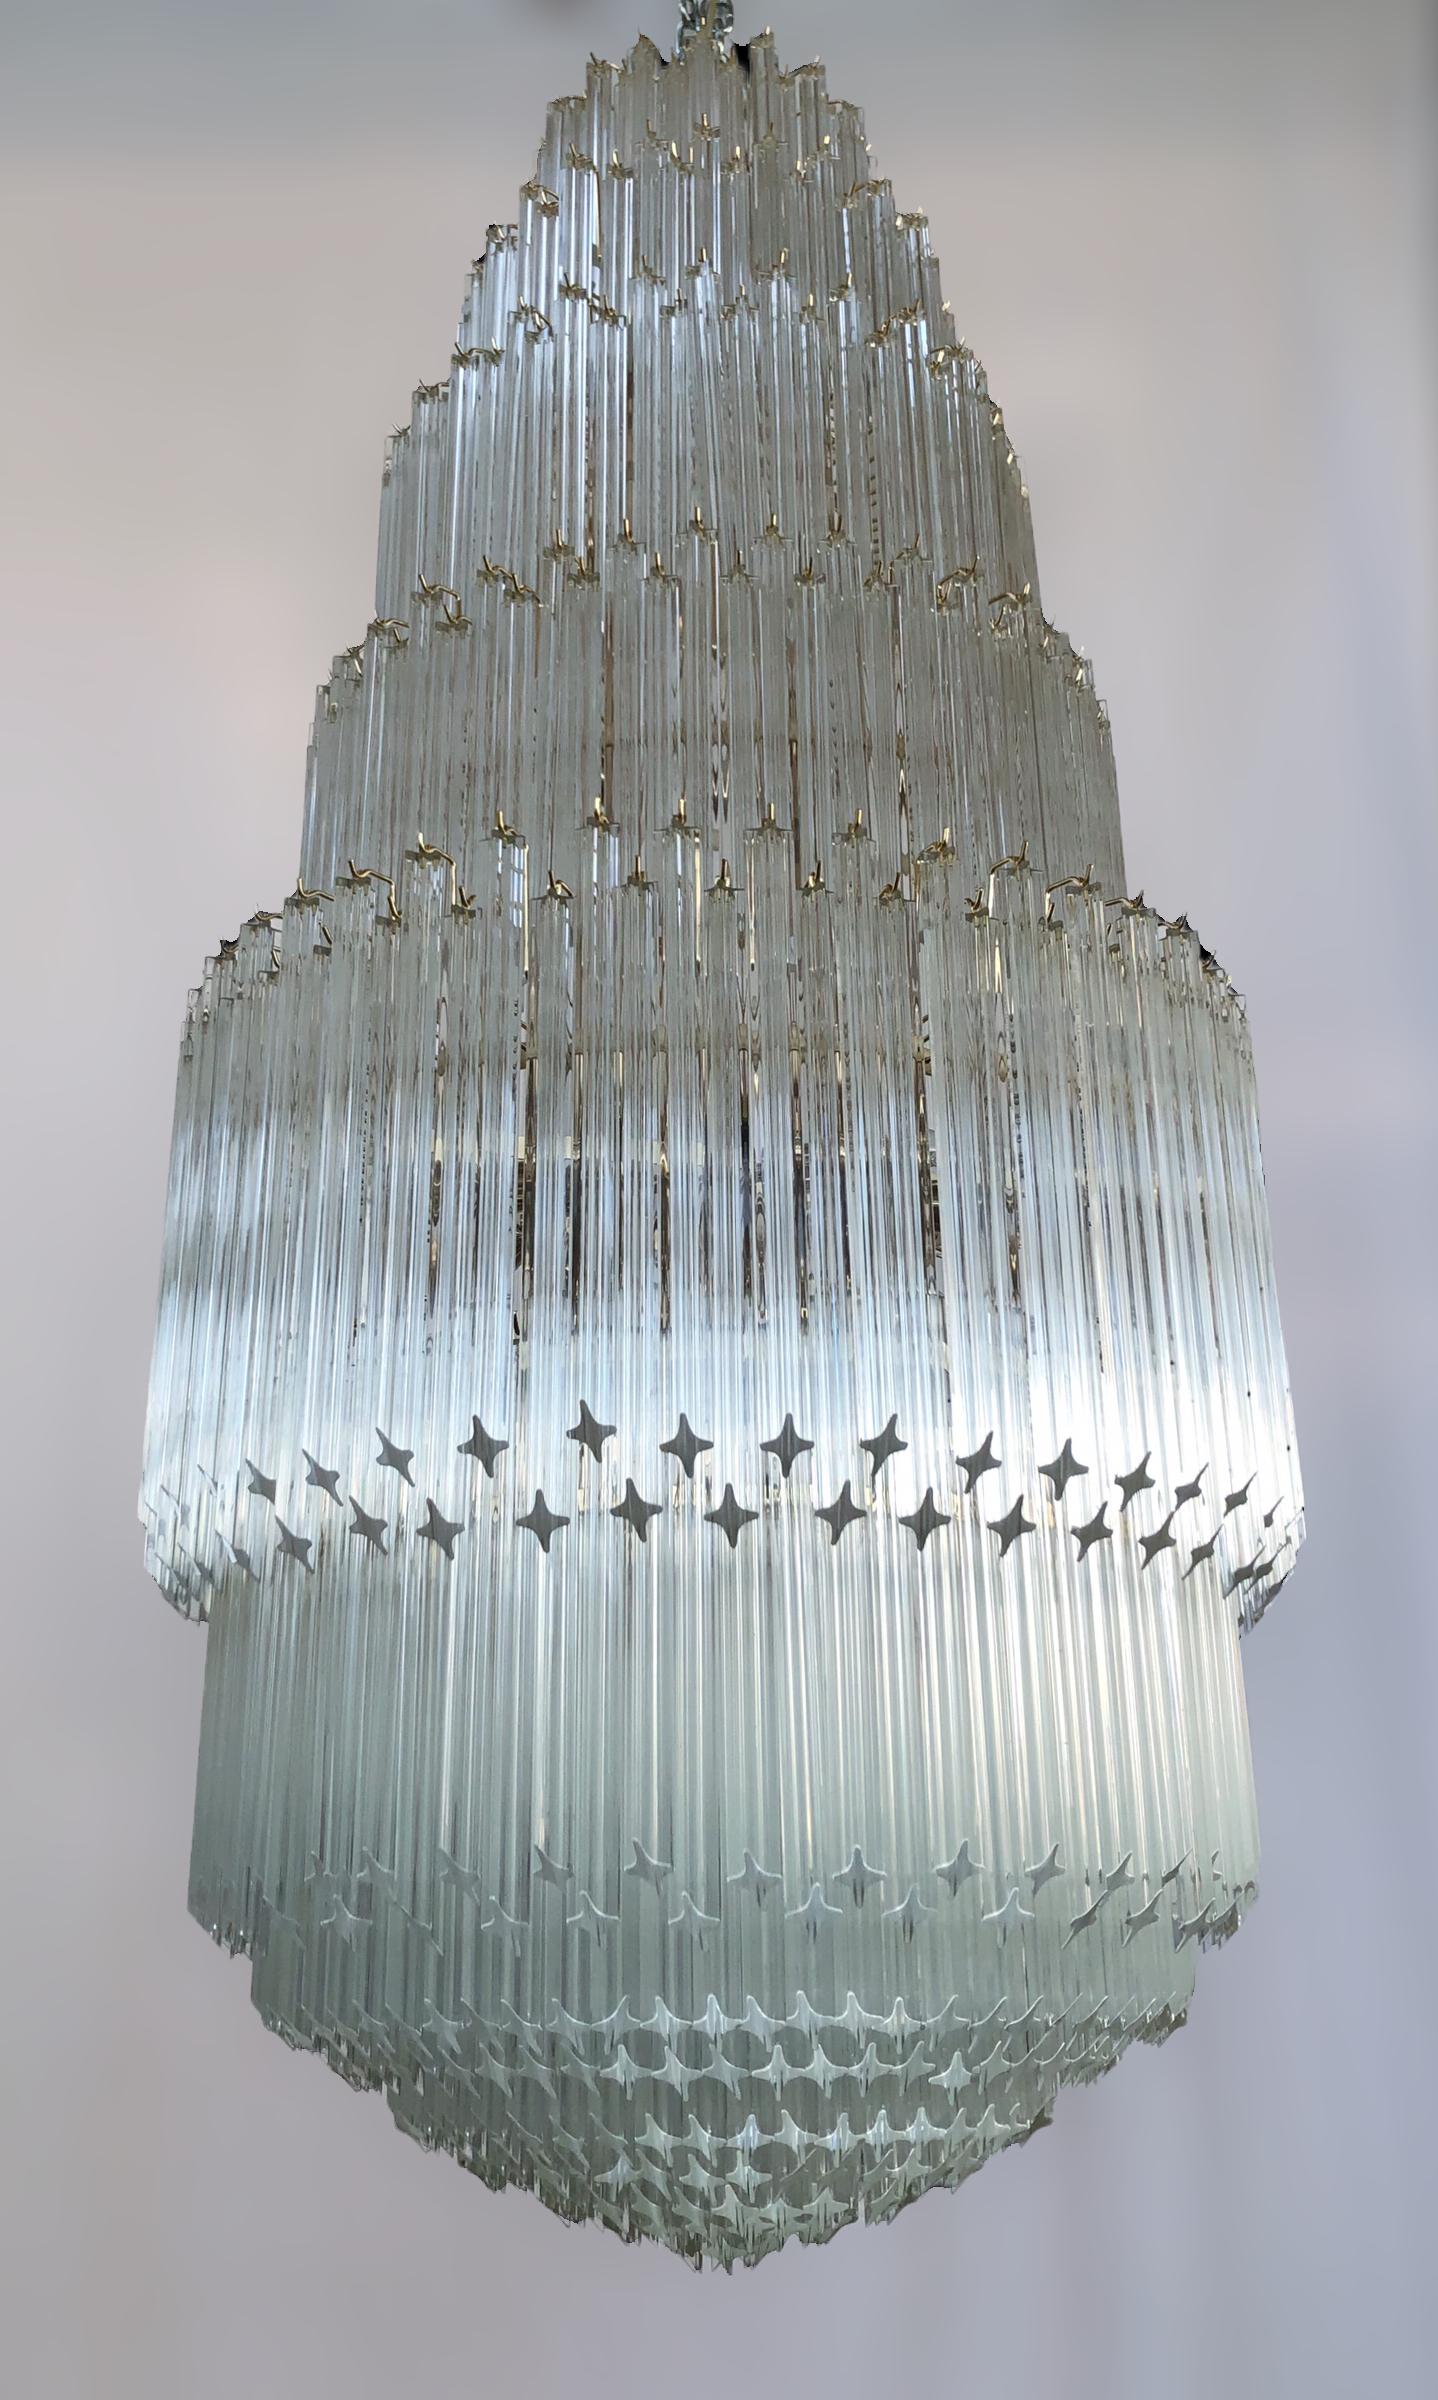 Oversized Italian chandelier shown in six tiers of clear Murano glasses cut into four points using Quadriedri technique, mounted on gold metal finish frame by Fabio Ltd / Made in Italy
32 lights / E26 or E27 type / max 60W each
Measures: diameter